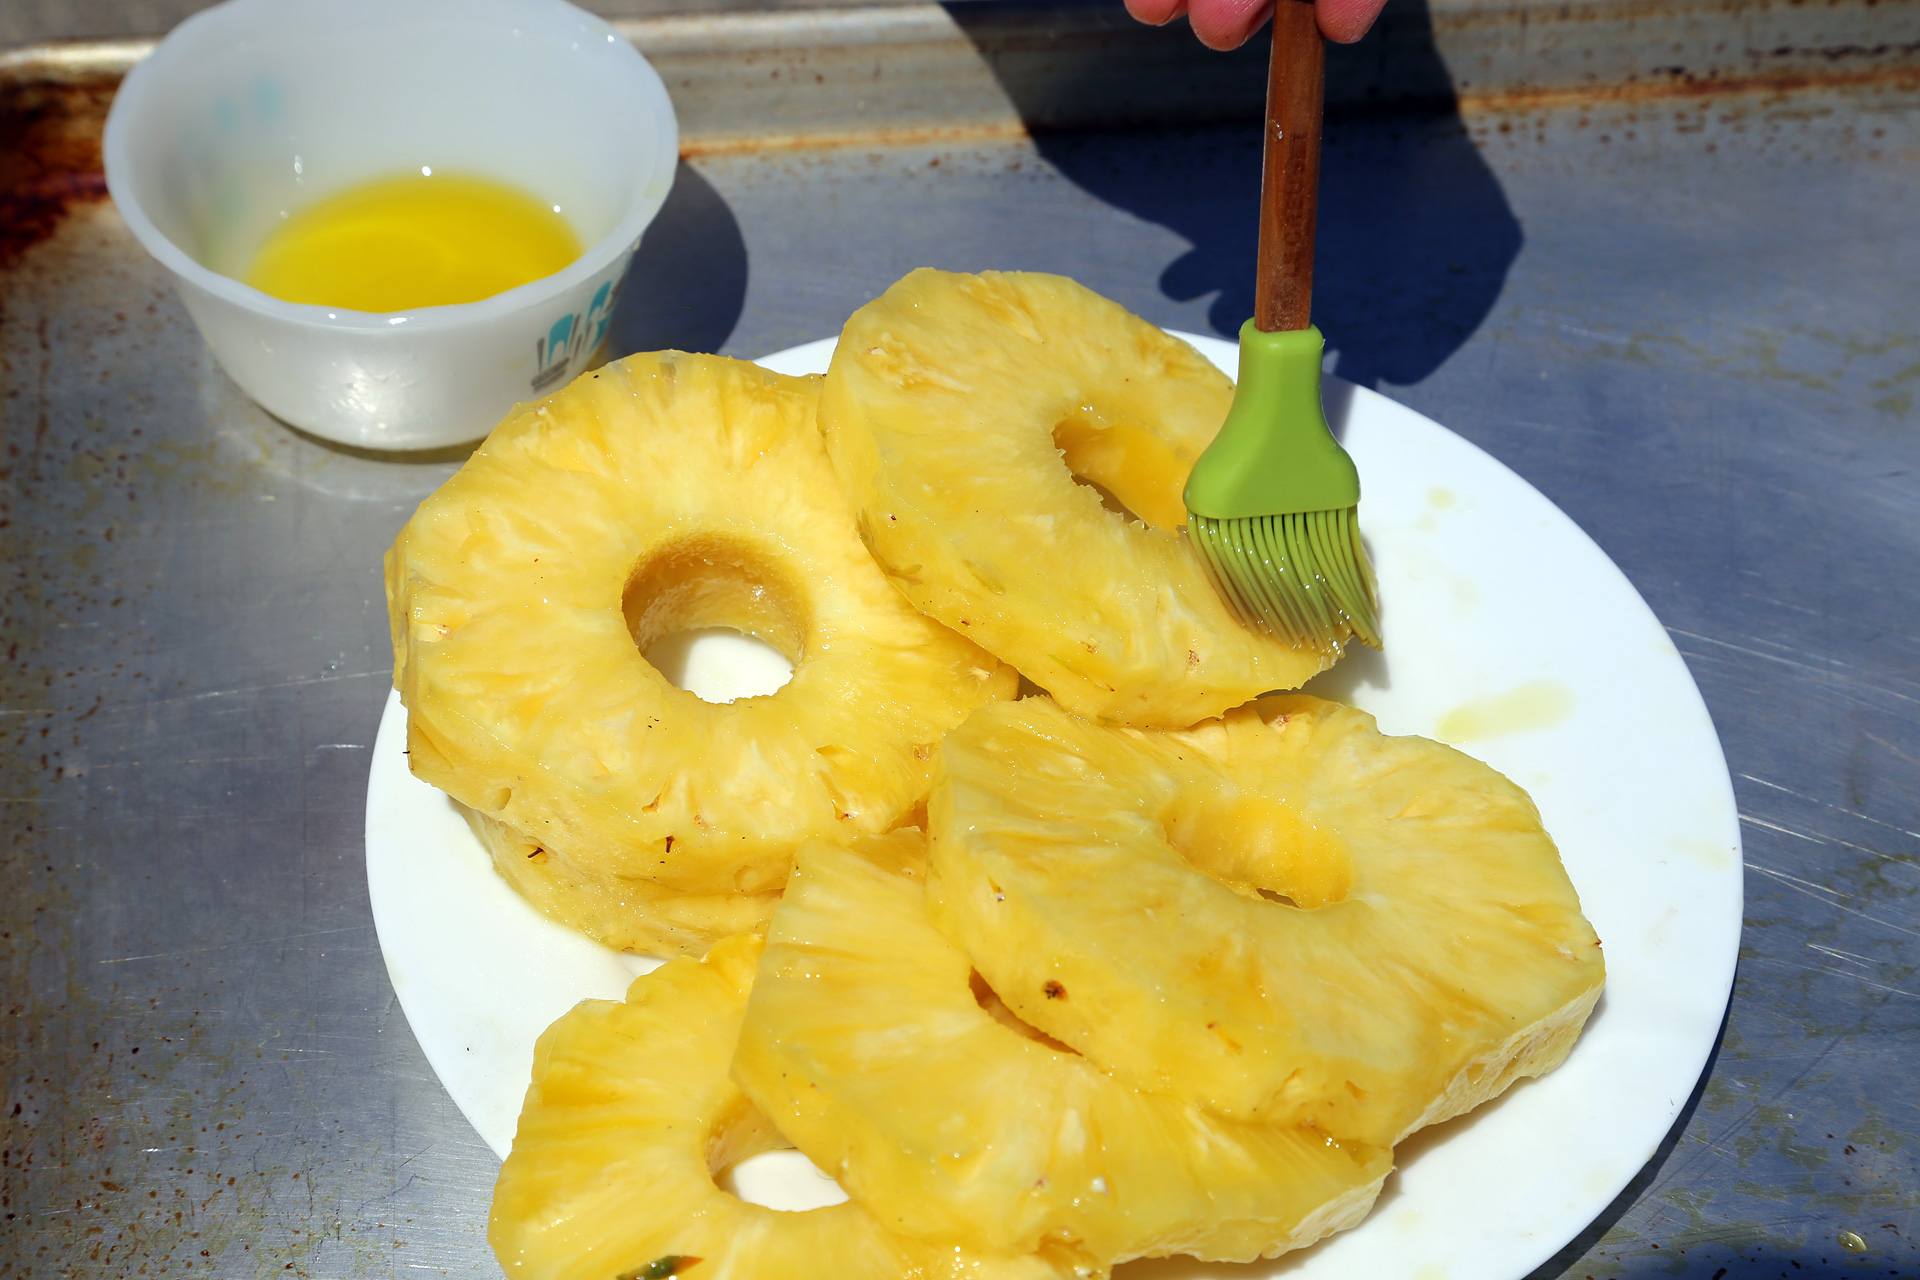 Prep four 1/2-inch-thick slices fresh pineapple, cored. Brush with olive oil for grilling.